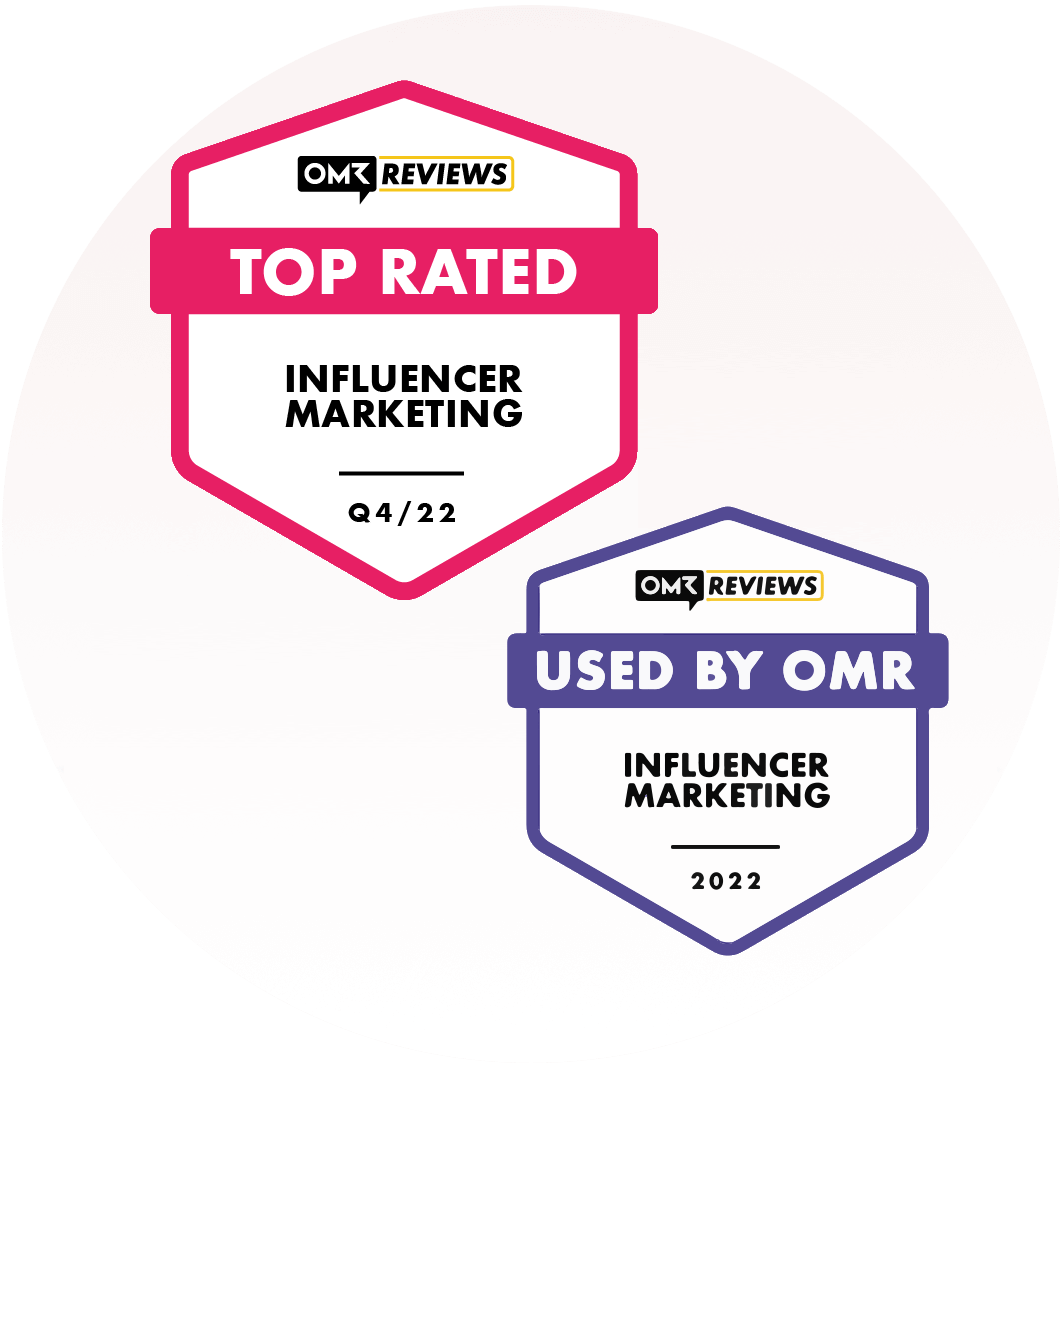 OMR Top Rated Influencer-Marekting Tool and Used by OMR Badge for influData